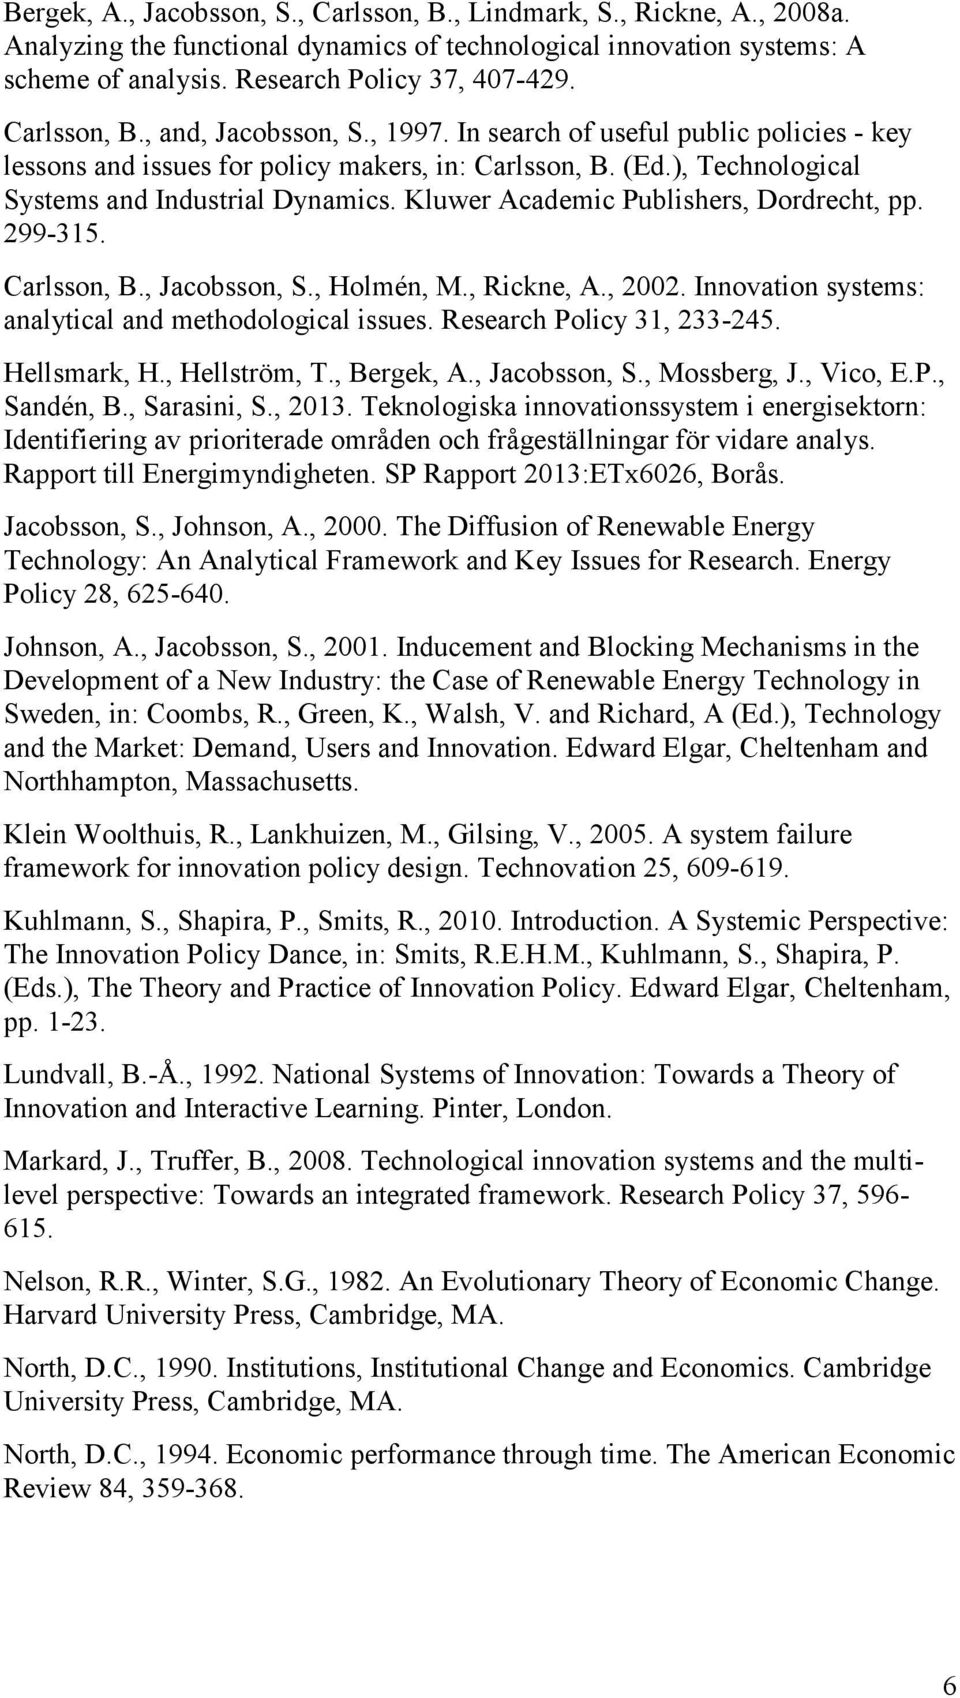 Kluwer Academic Publishers, Dordrecht, pp. 299-315. Carlsson, B., Jacobsson, S., Holmén, M., Rickne, A., 2002. Innovation systems: analytical and methodological issues. Research Policy 31, 233-245.